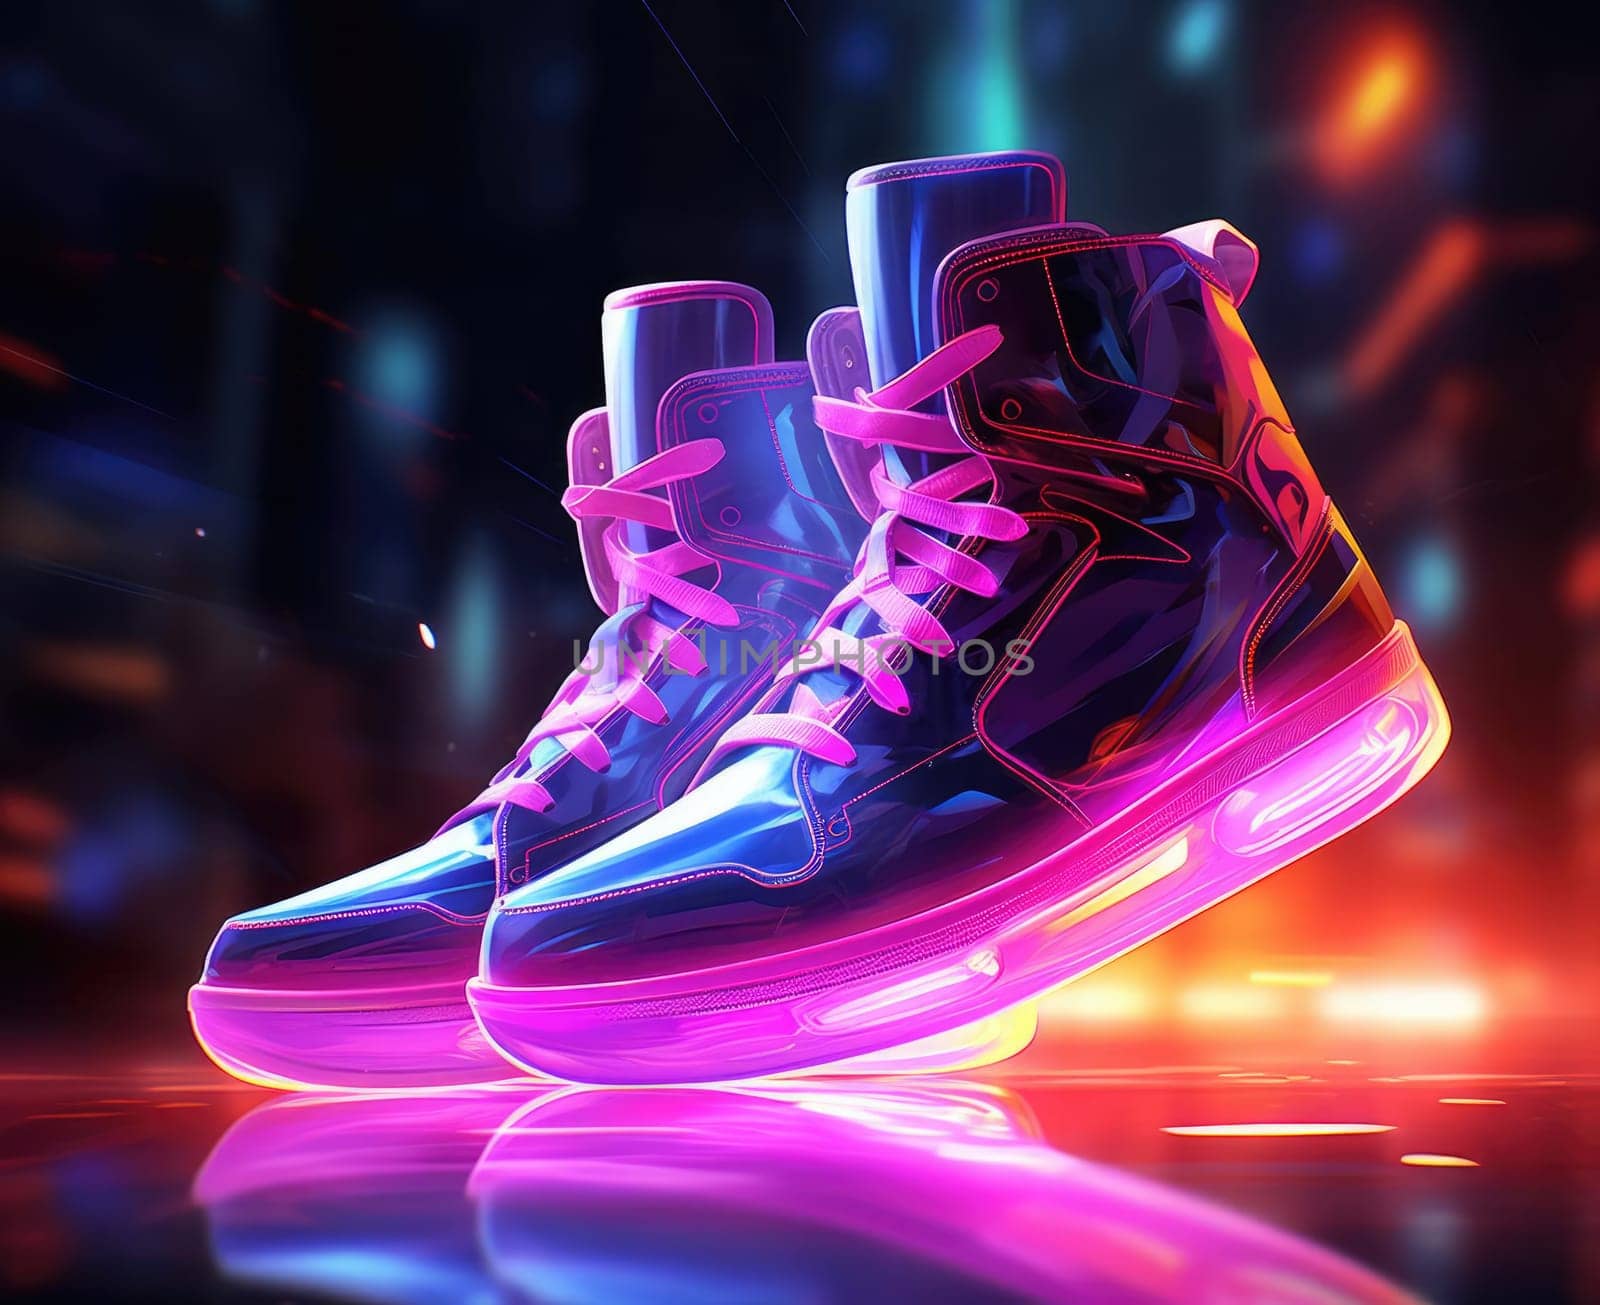 Sneakers with luminous elements in the style of cyberpunk